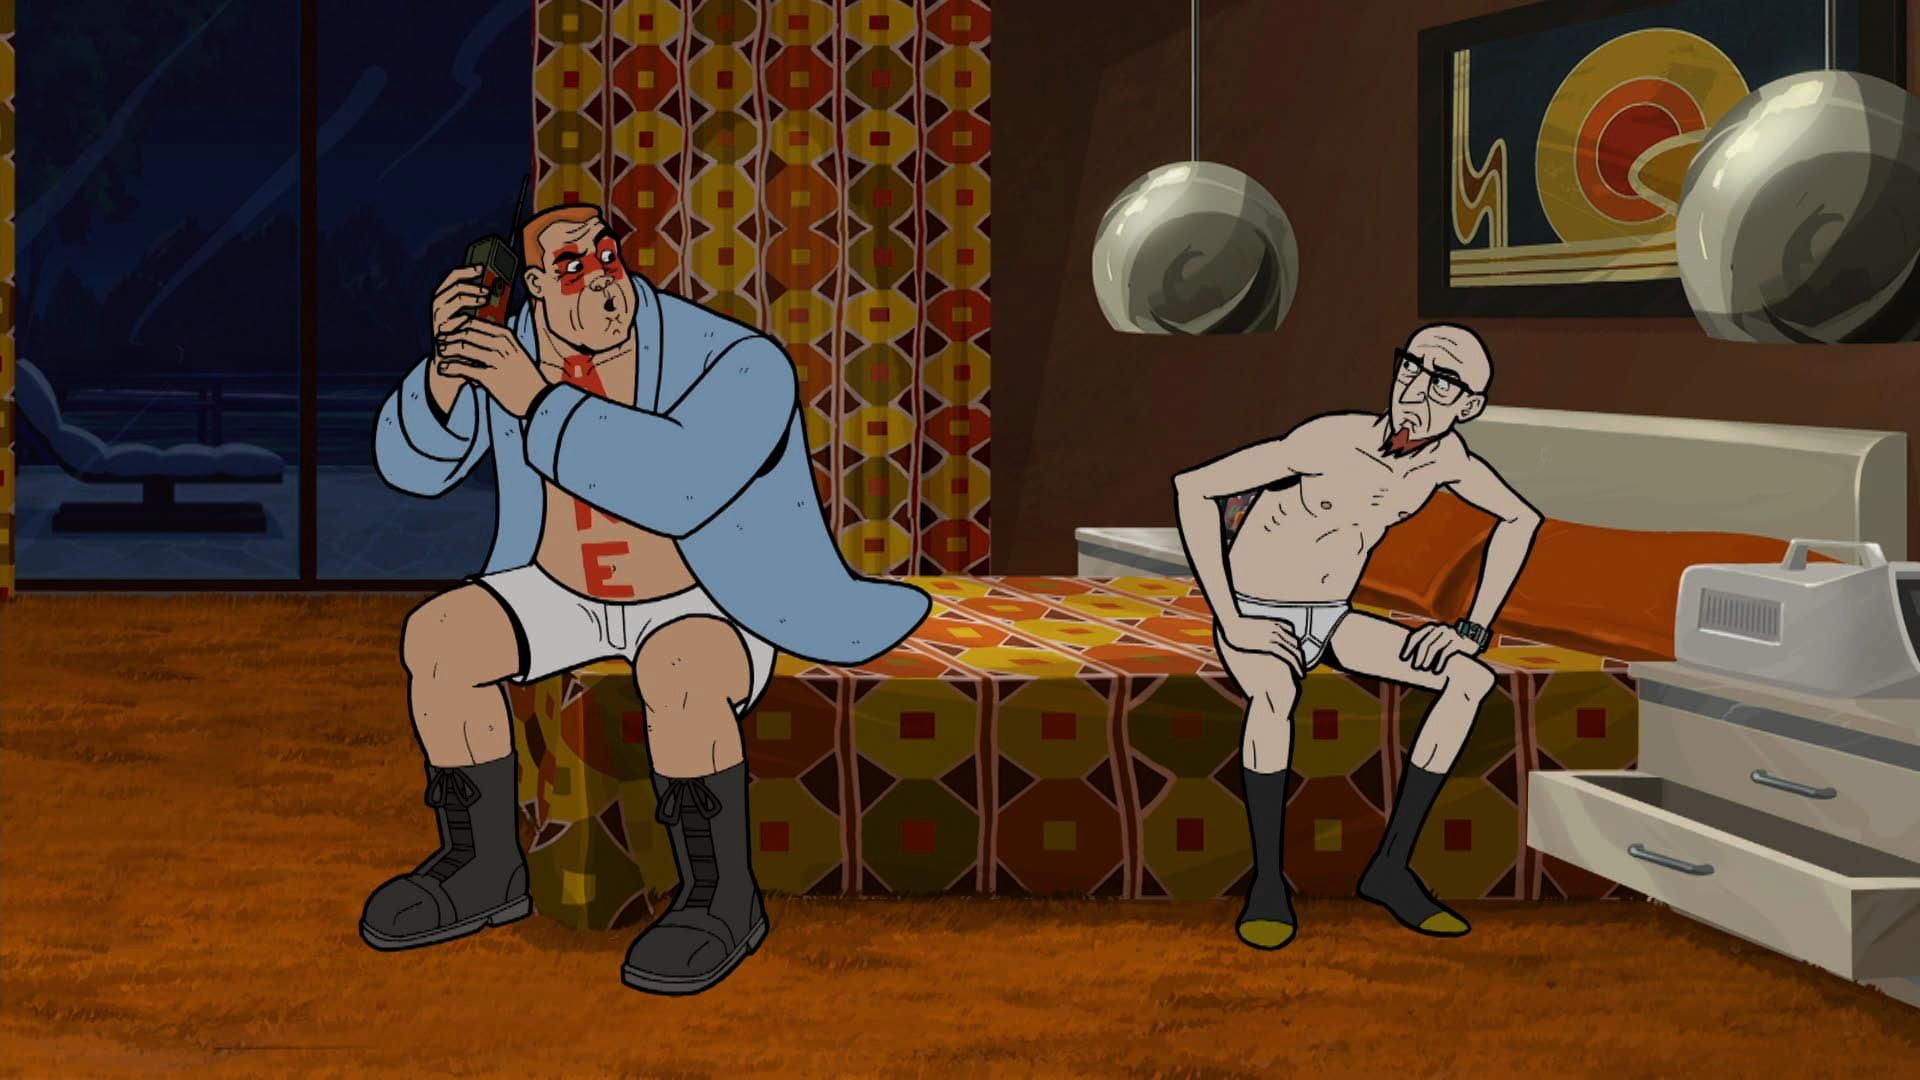 Venture Bros Cartoon Porn - Watch The Venture Bros. Episodes and Clips for Free from Adult Swim